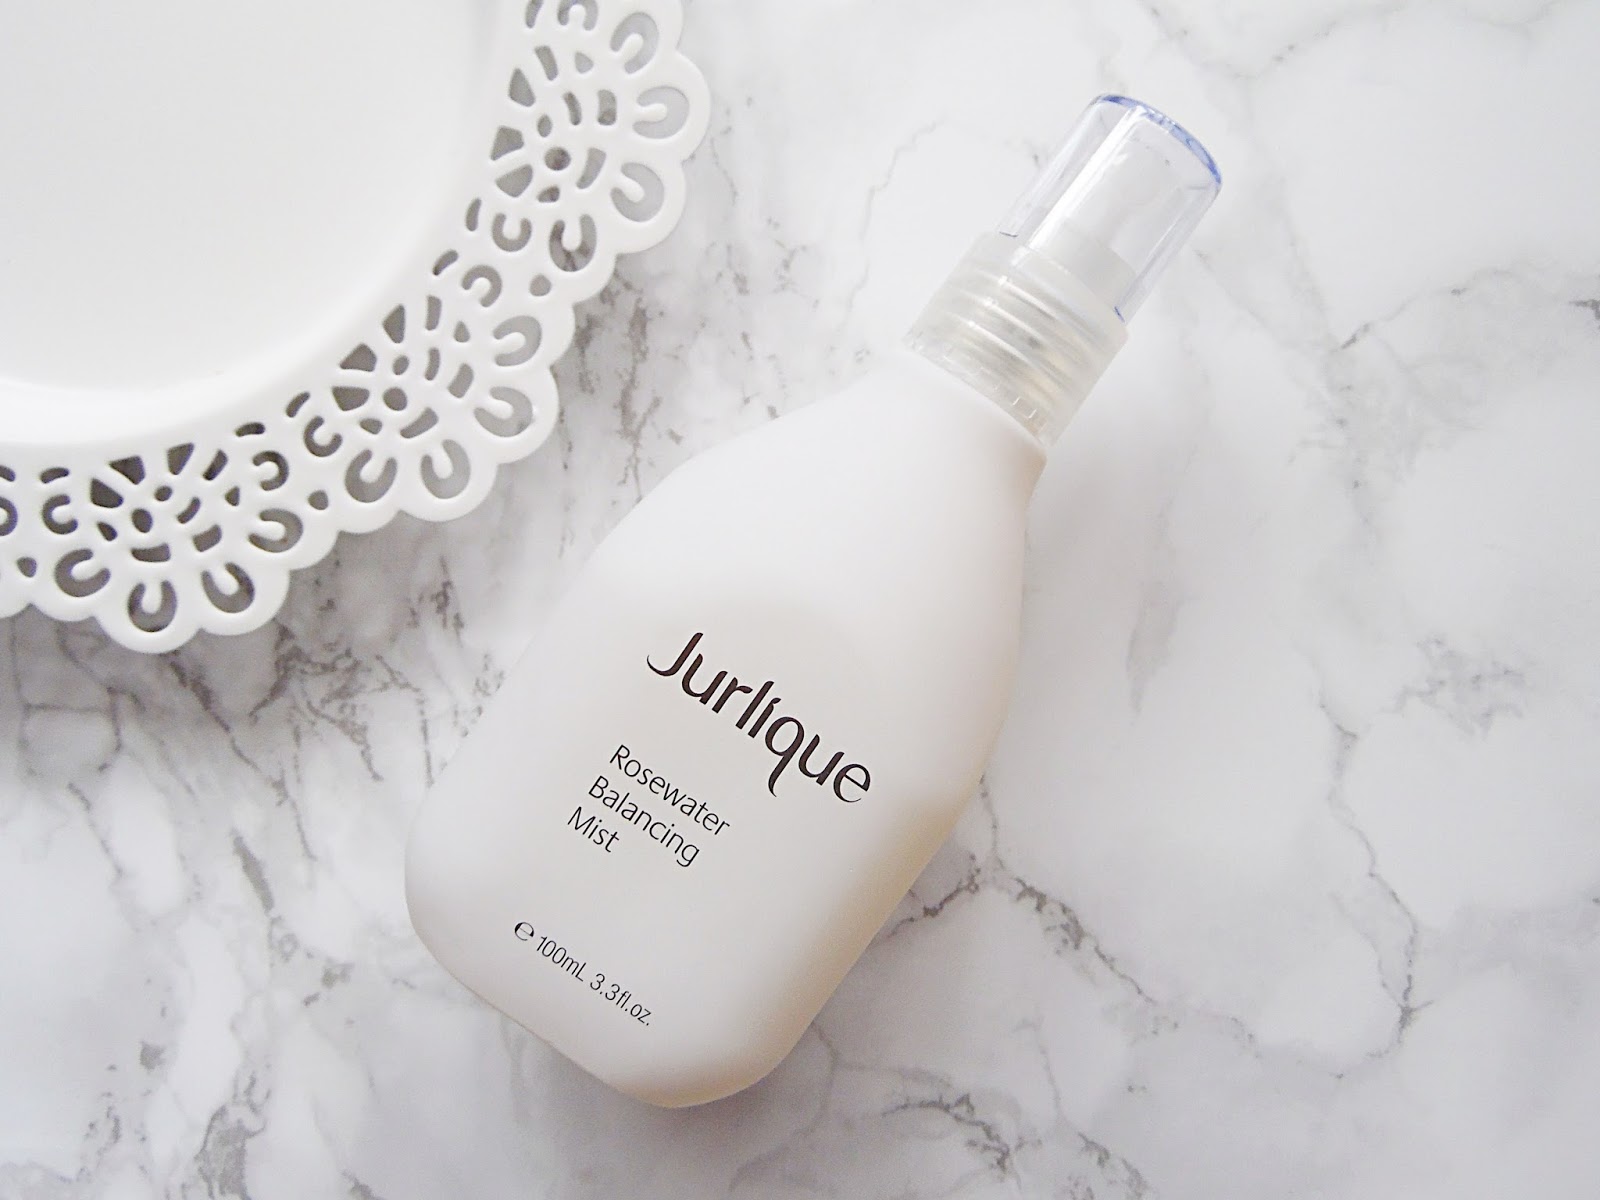 Jurlique Morning Skincare Products